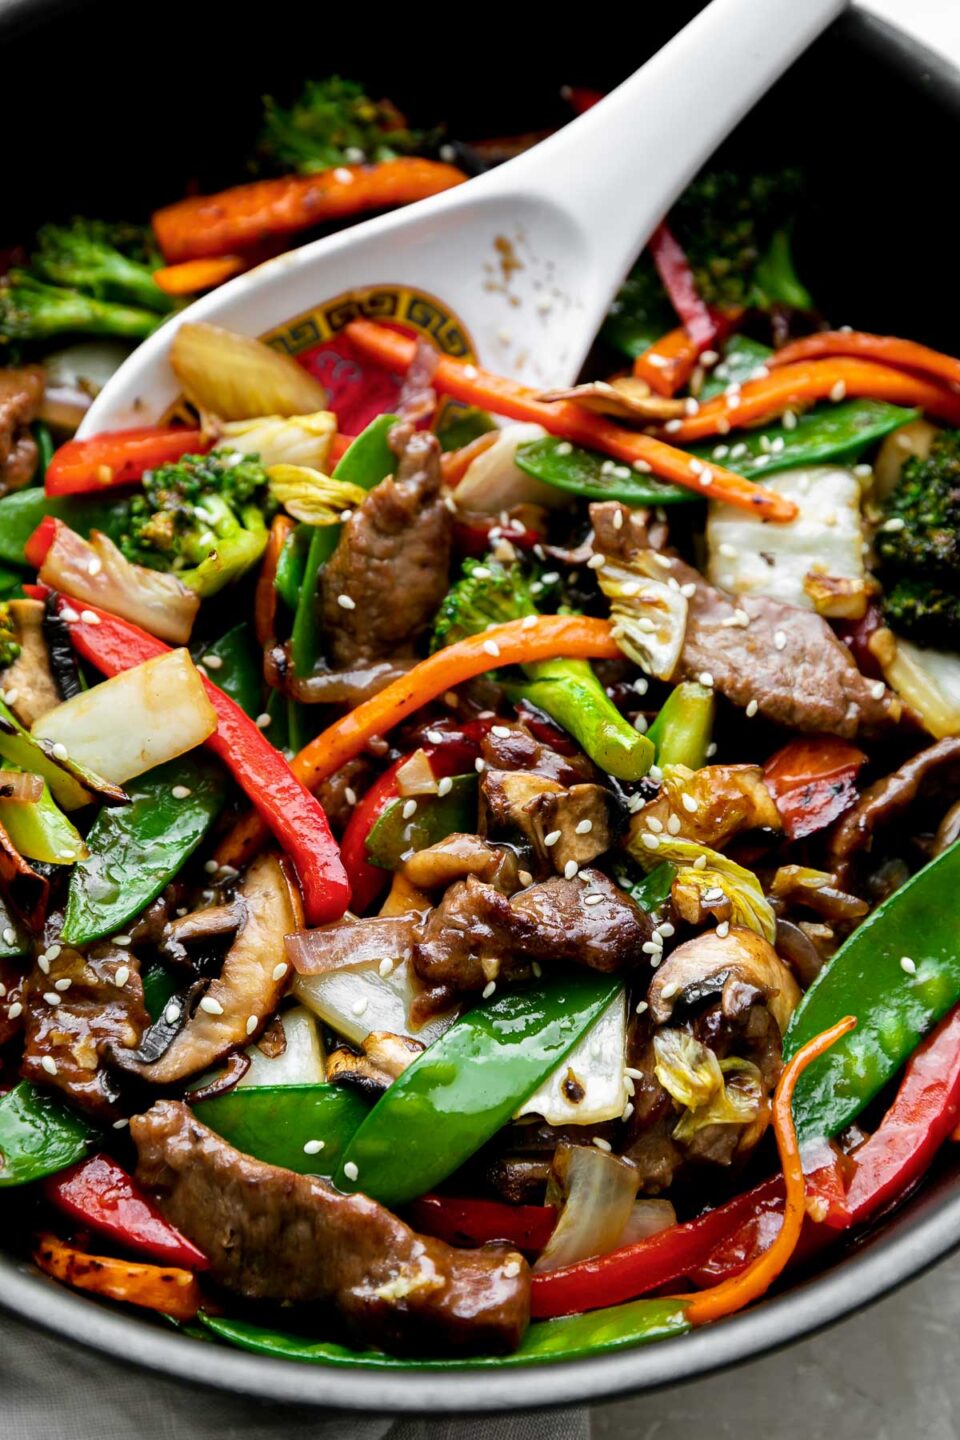 A close up shot of finished beef vegetable stir fry fills a black Zwilling Madura Nonstick Skillet. The beef and vegetables are glossy with a coating of homemade stir fry sauce. The skillet sits atop a creamy white textured surface with a light gray linen napkin tucked underneath. A white Chinese soup spoon rests inside of the skillet for serving.